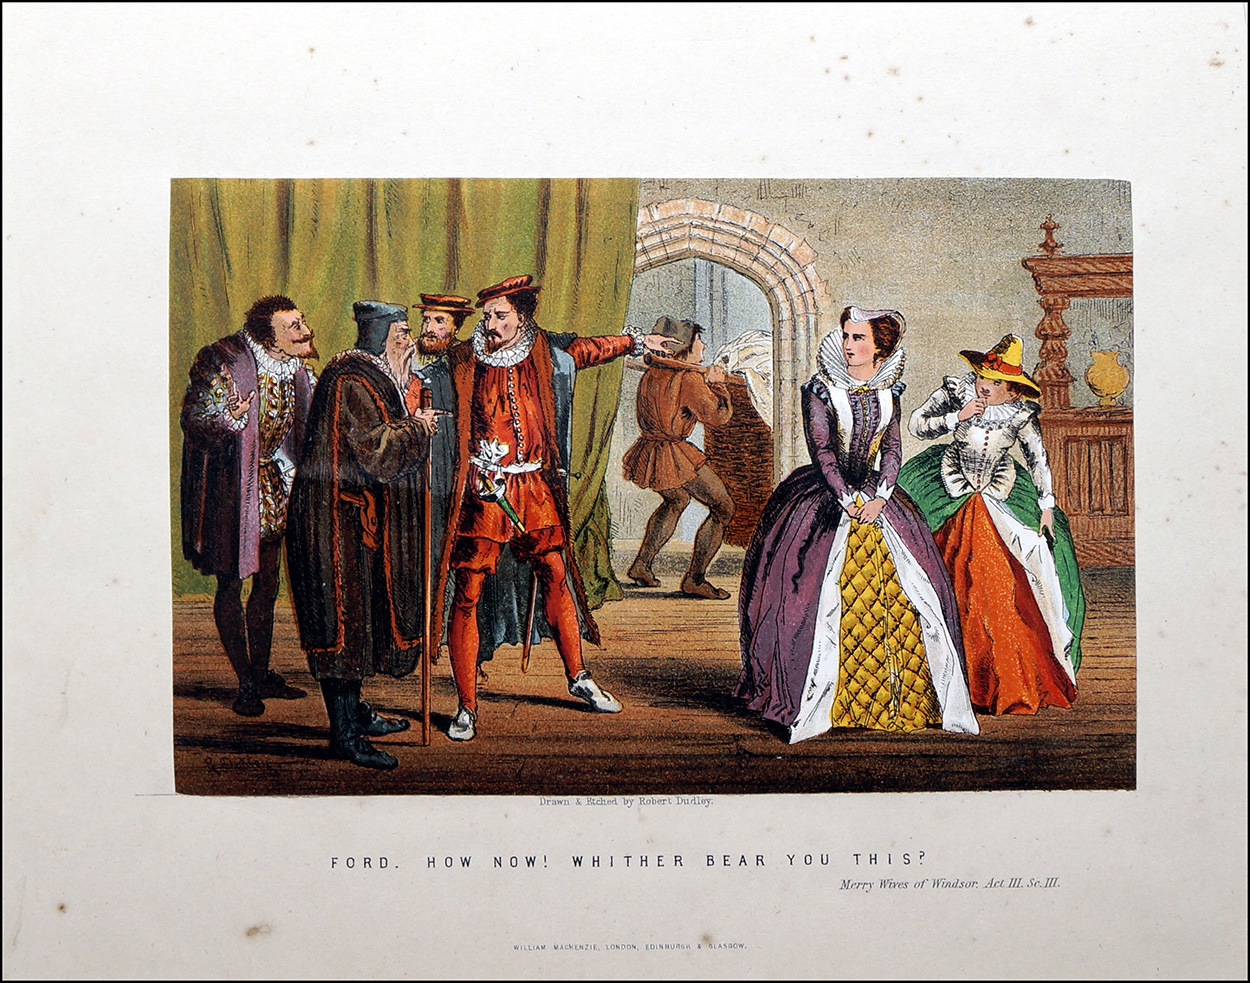 Scenes from Shakespeare - Merry Wives of Windsor (Print) art by Robert Dudley Art at The Illustration Art Gallery